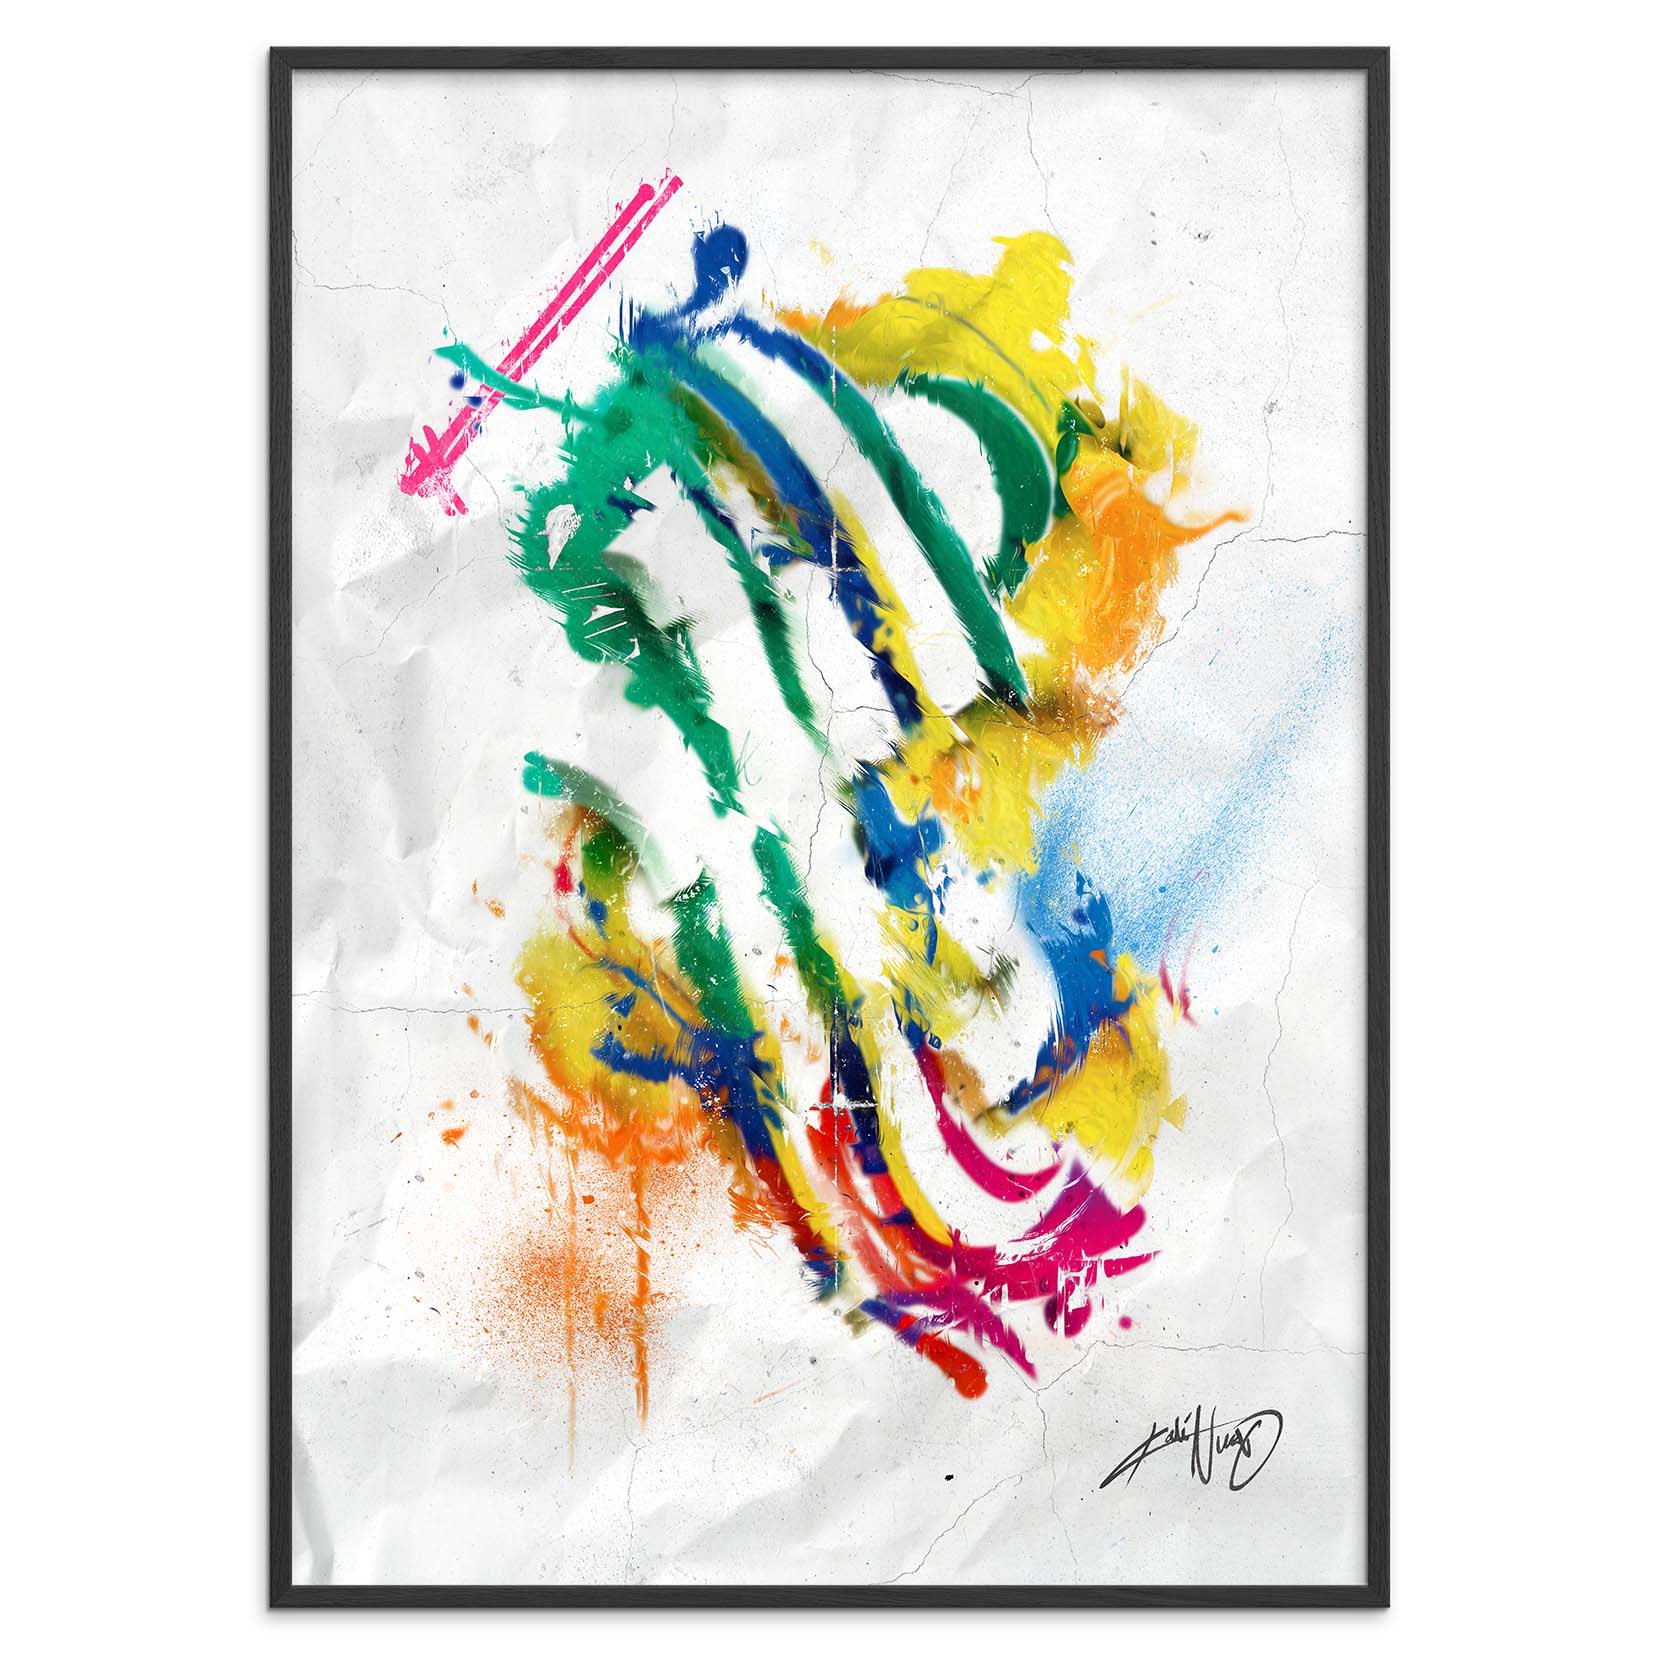 colorful abstract art poster in a black frame on a white background